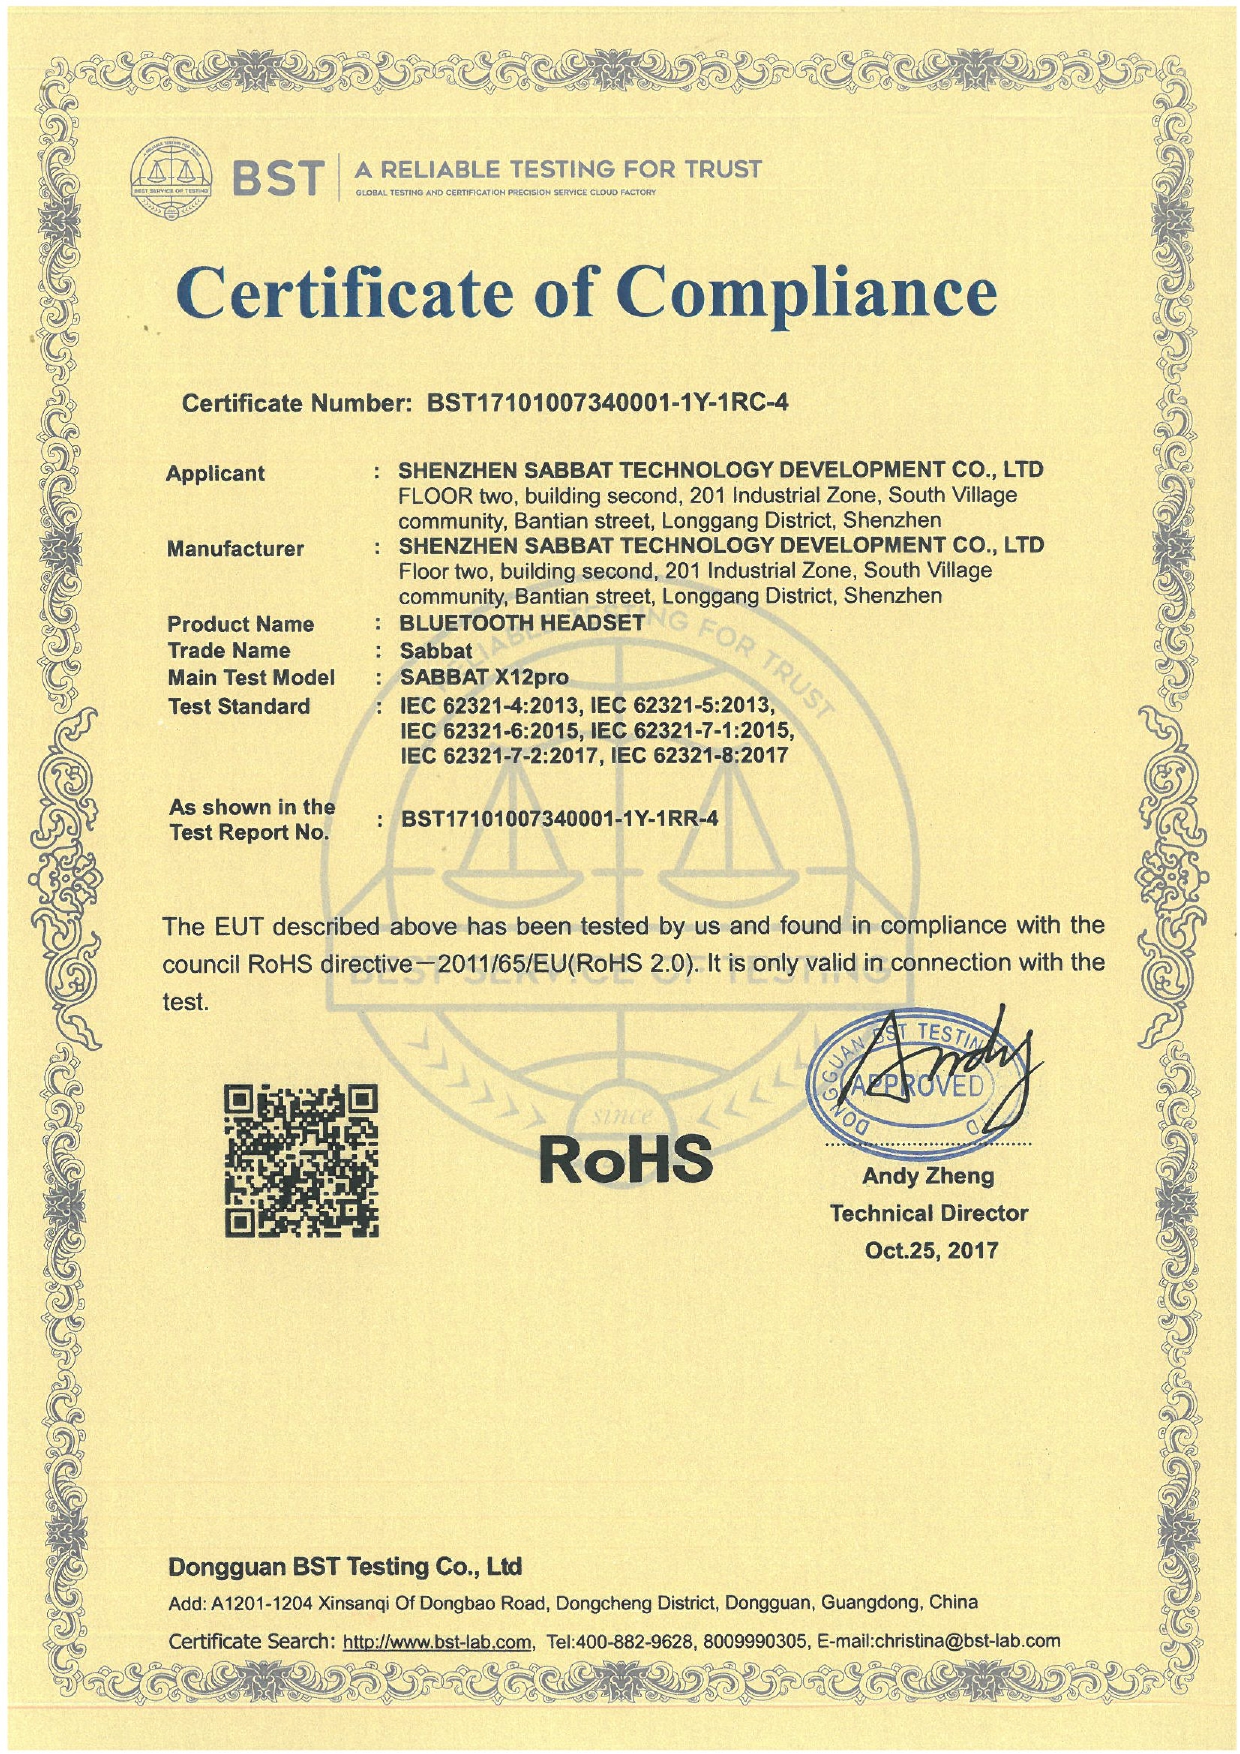 X12 ROHS Certification